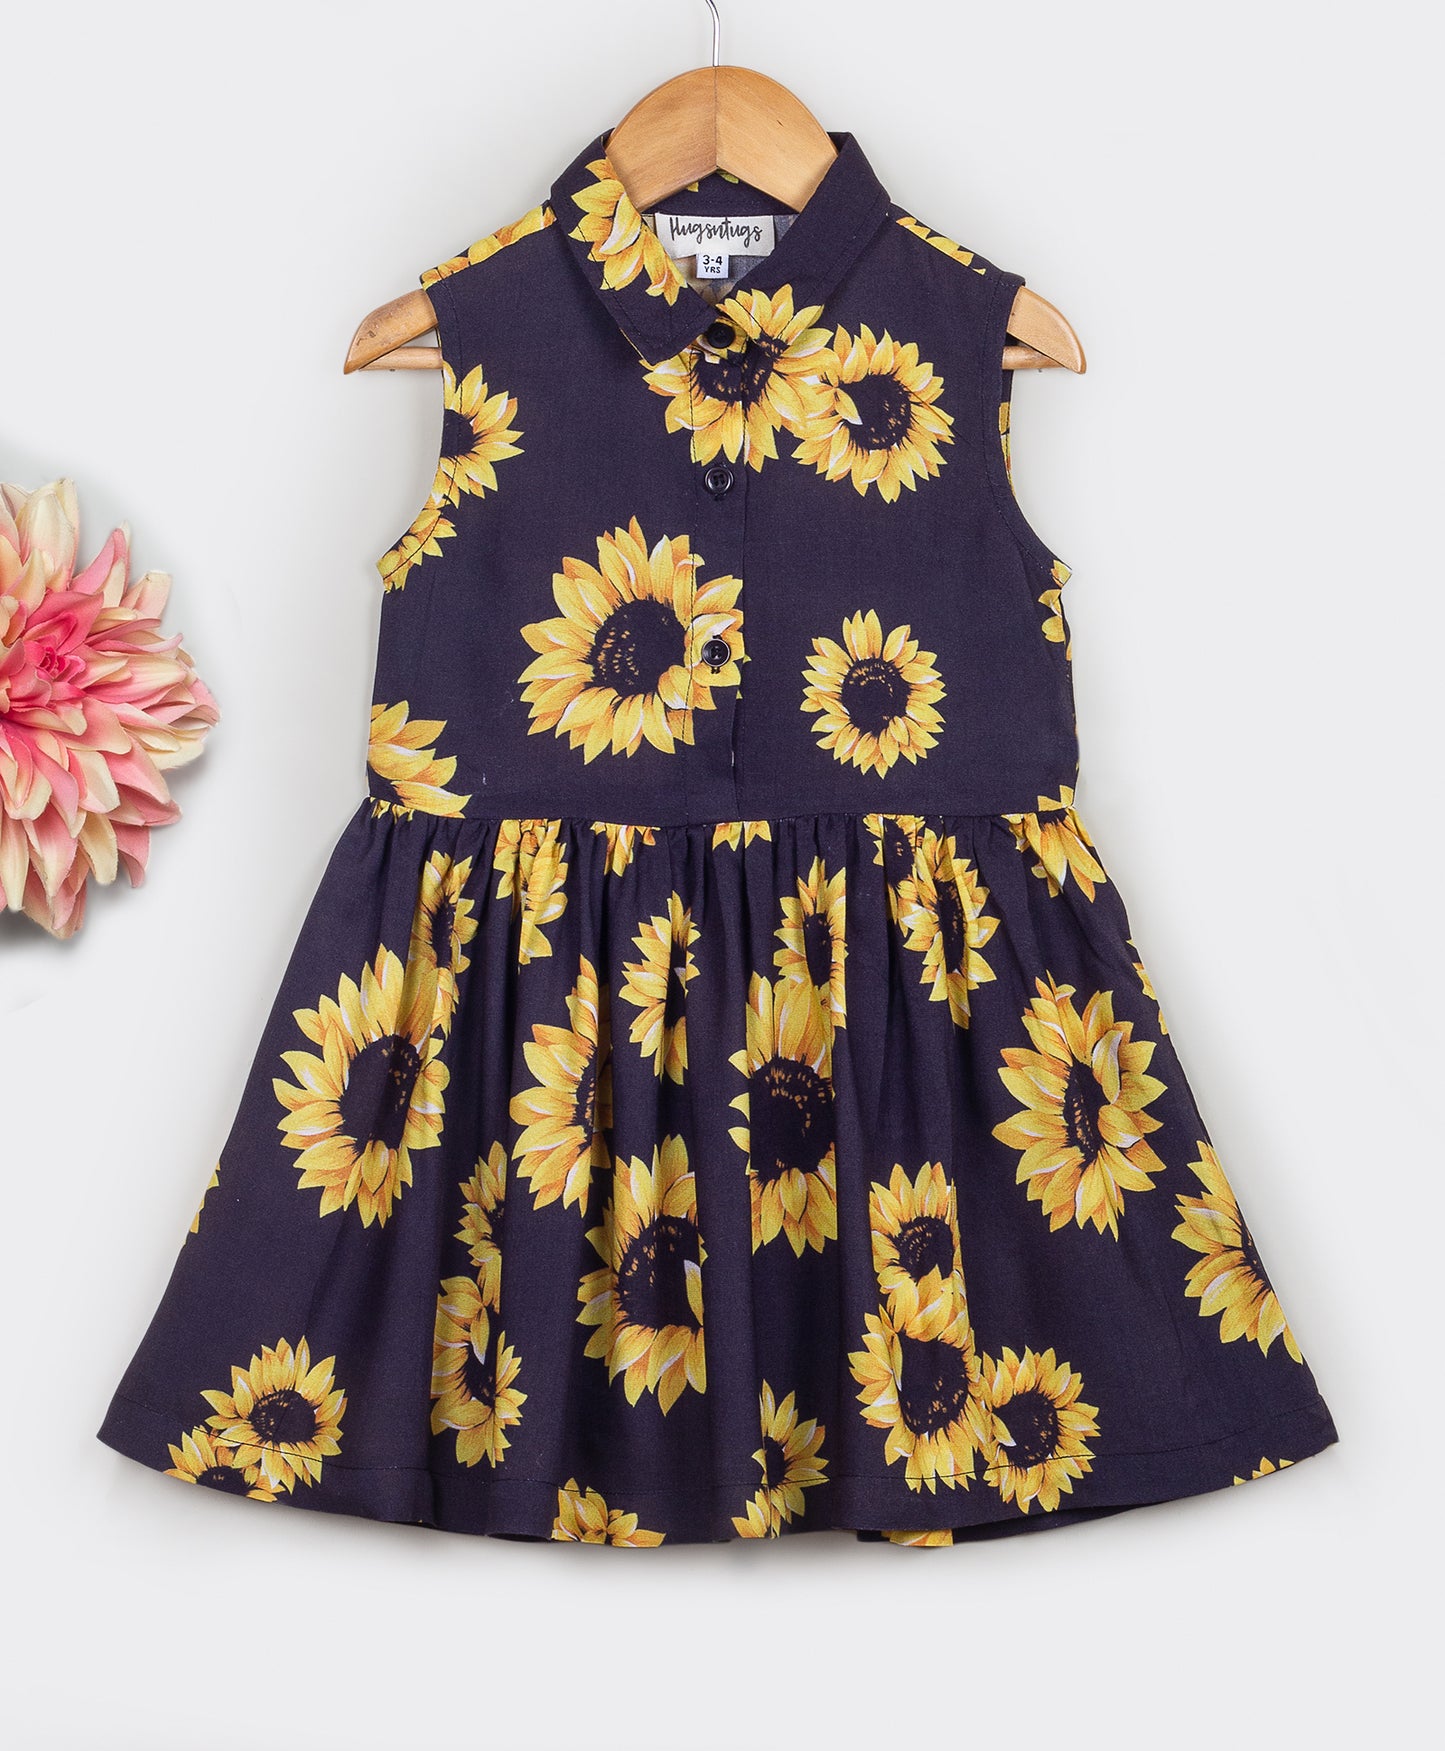 All over sunflower print dress with front button closure